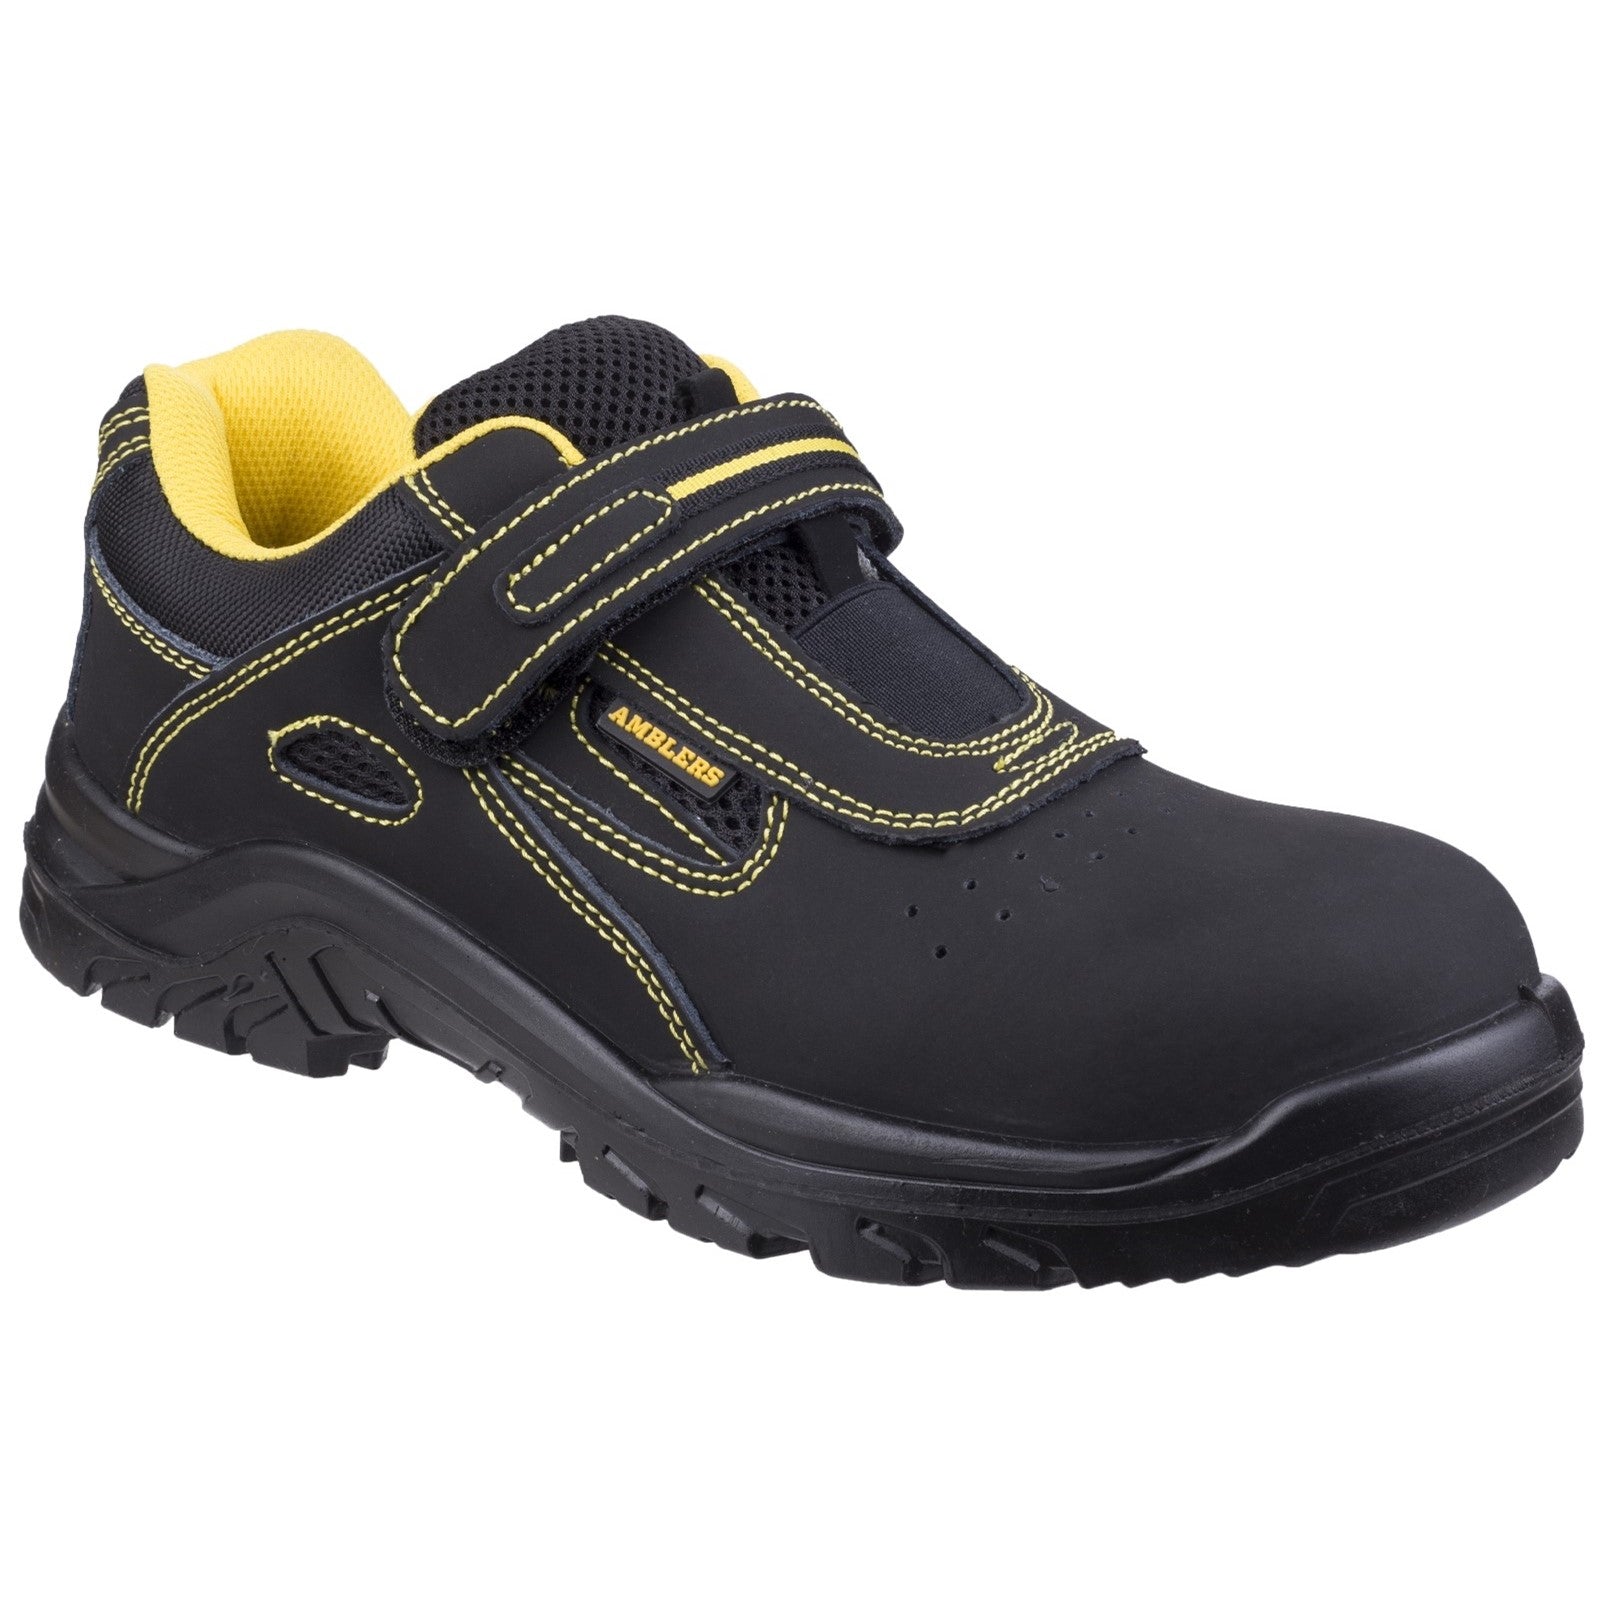 FS77 Breathable Touch Fastening Safety Trainer, Amblers Safety